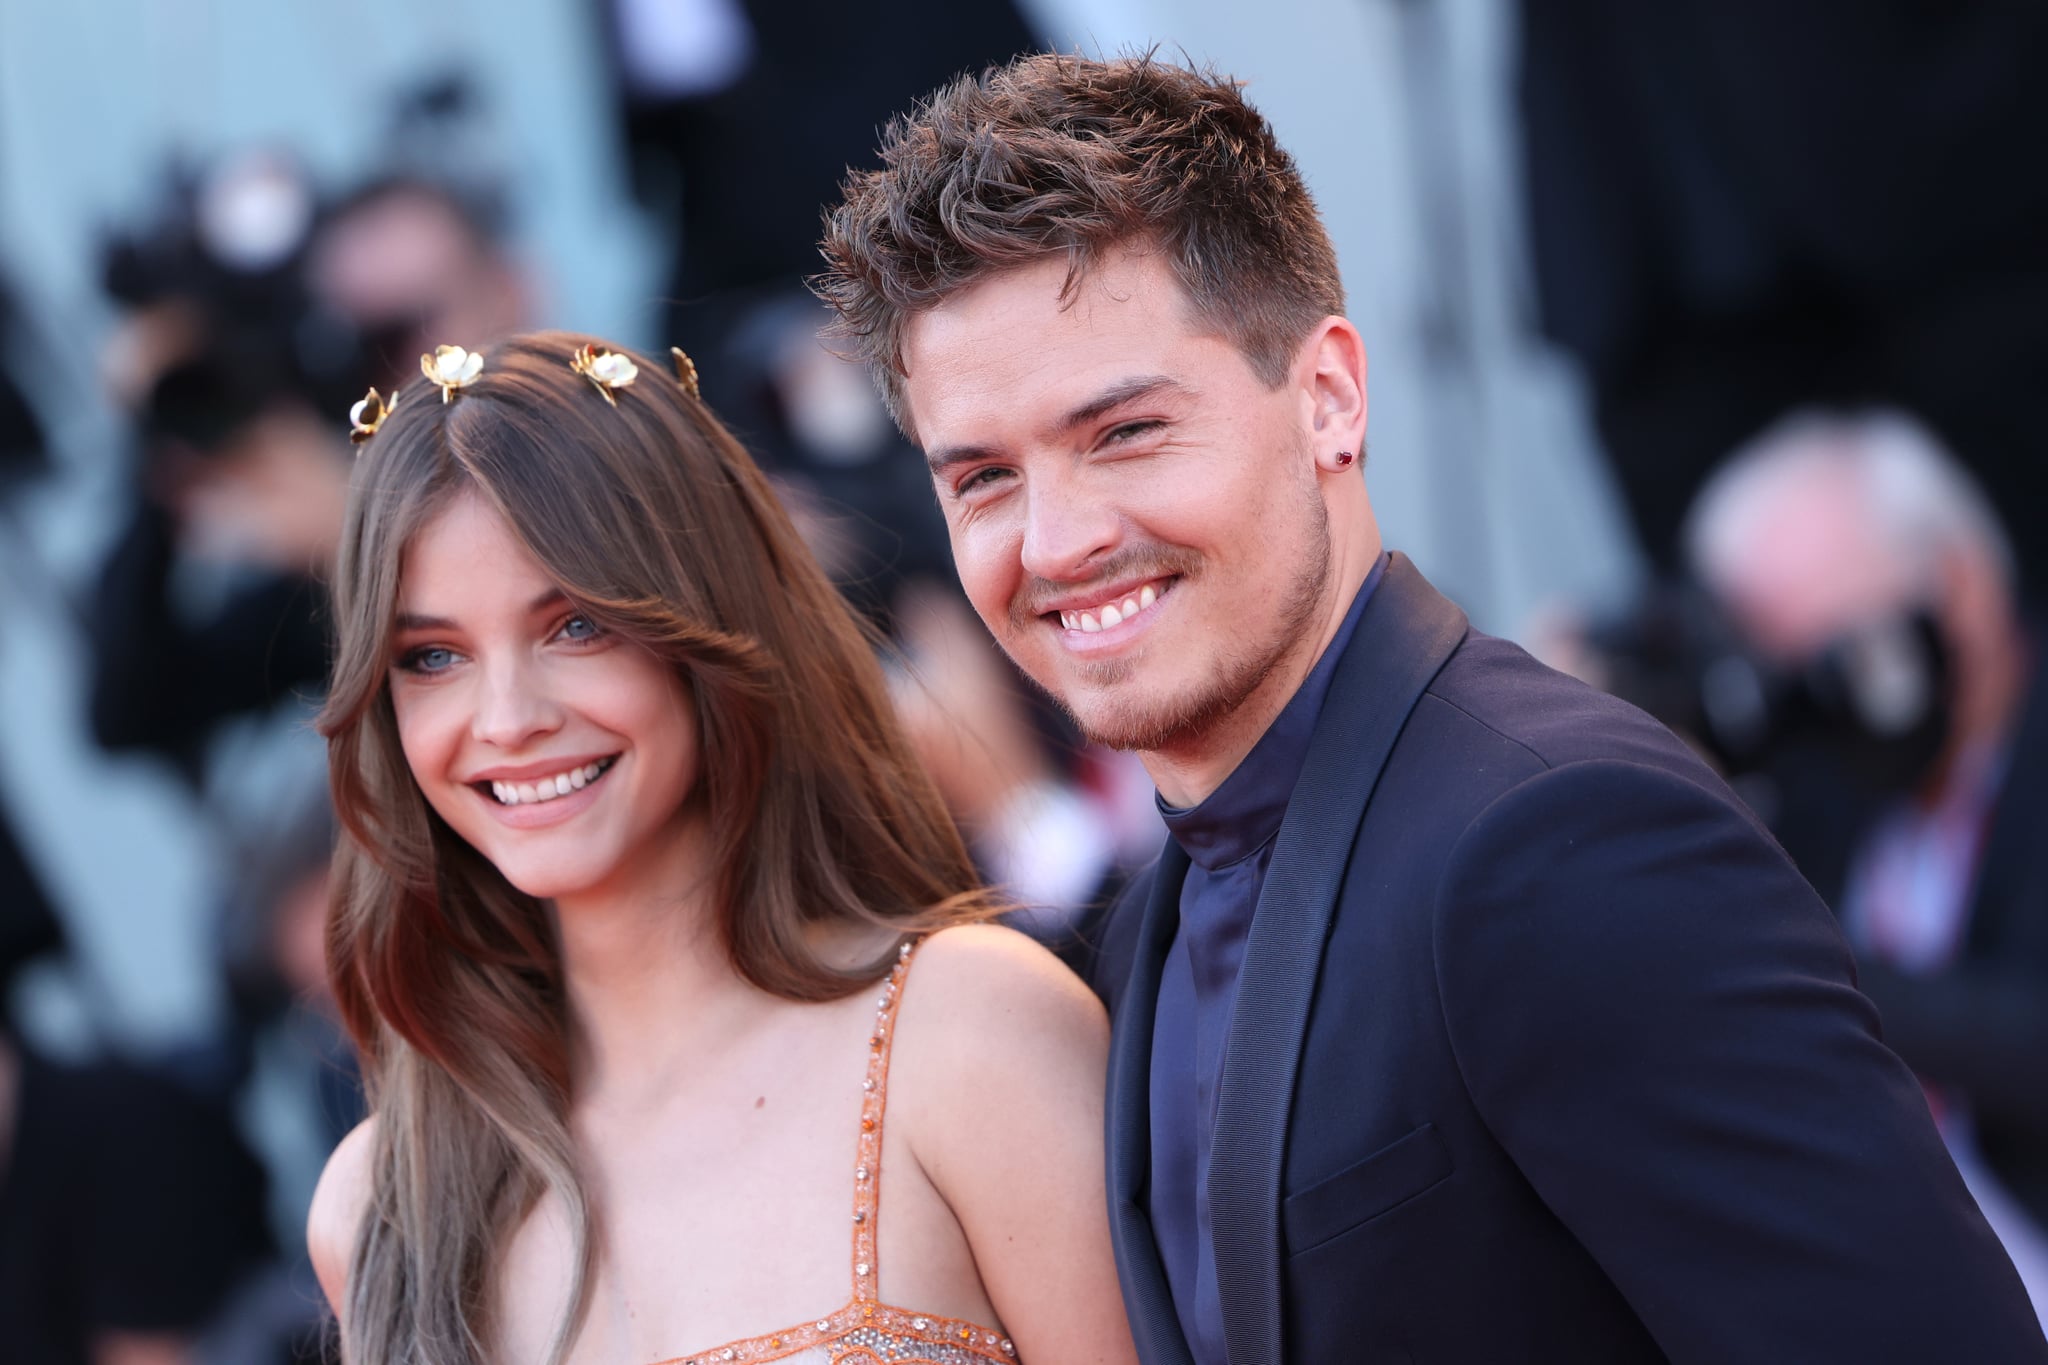 Barbara Palvin and Dylan Sprouse at Venice Film Festival